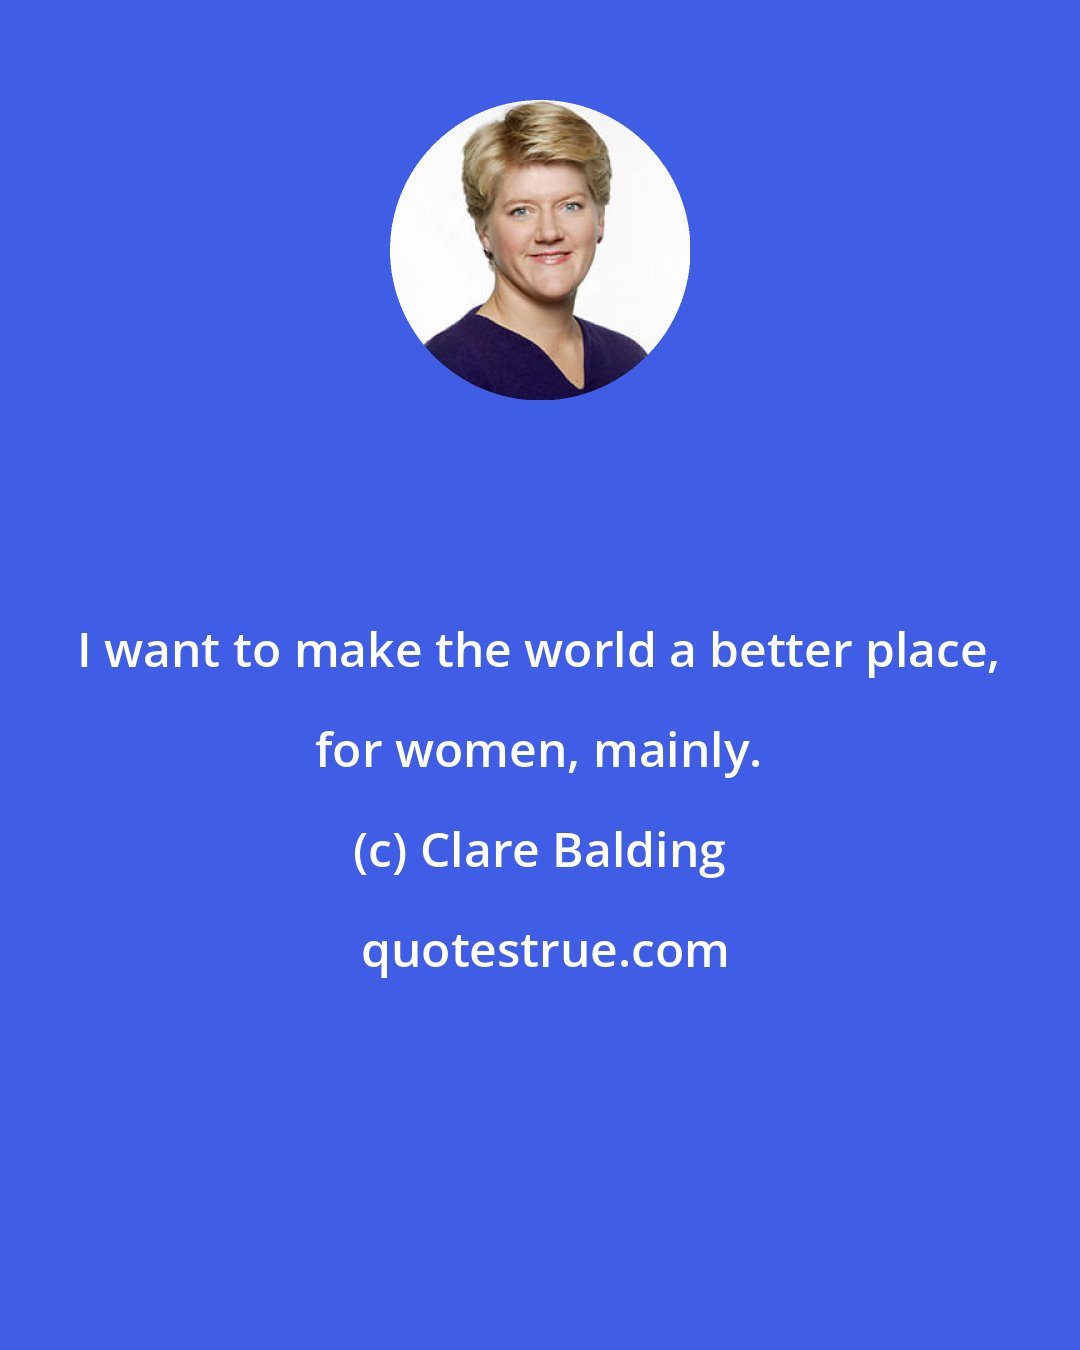 Clare Balding: I want to make the world a better place, for women, mainly.